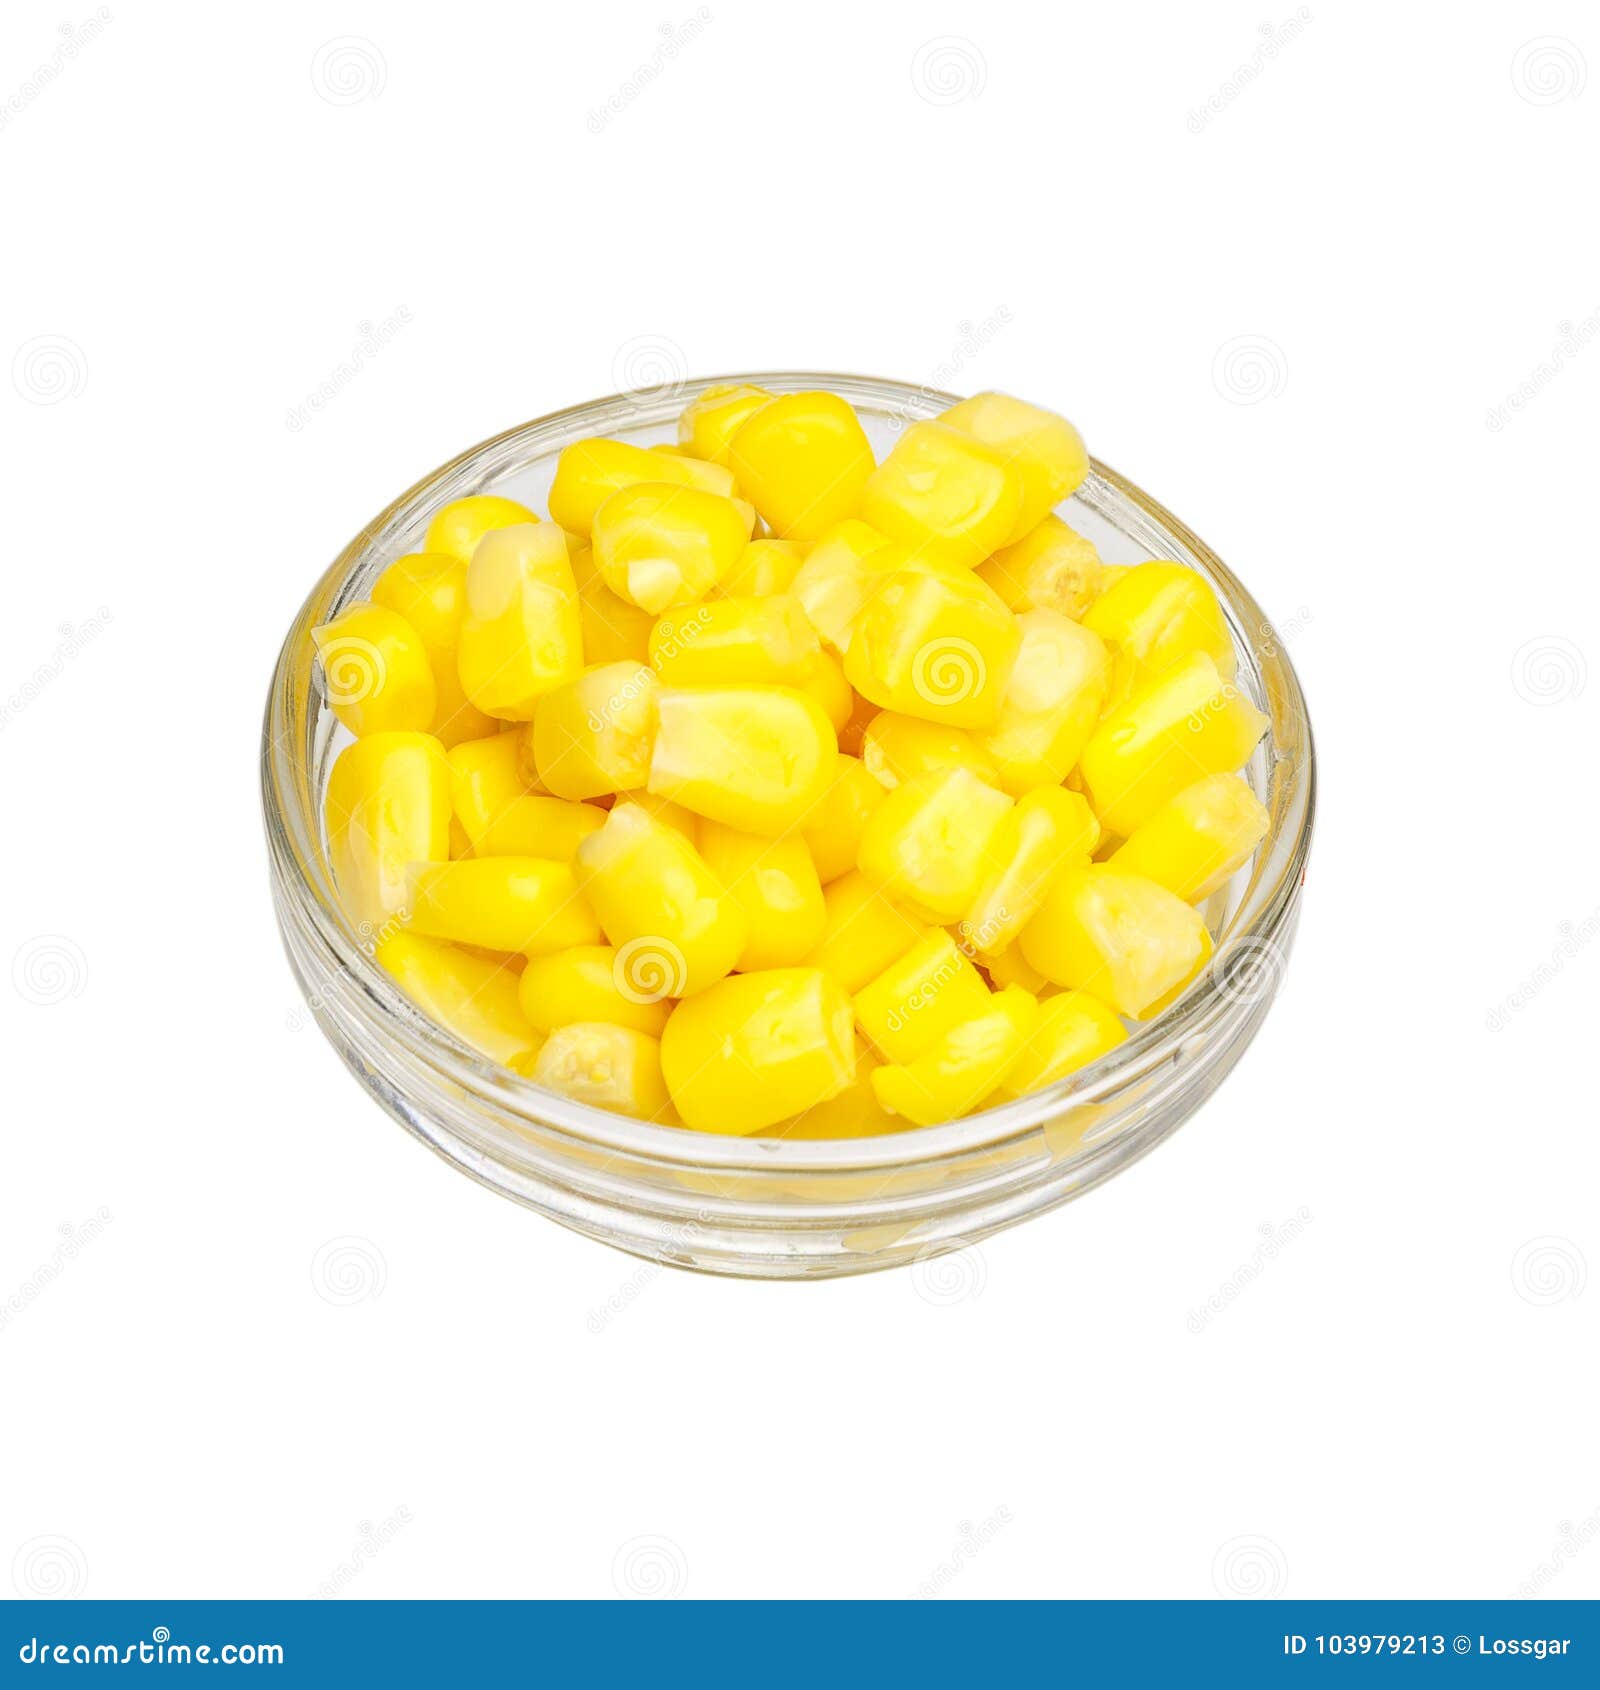 Canned corn in glass bowl. Isolated on white background.